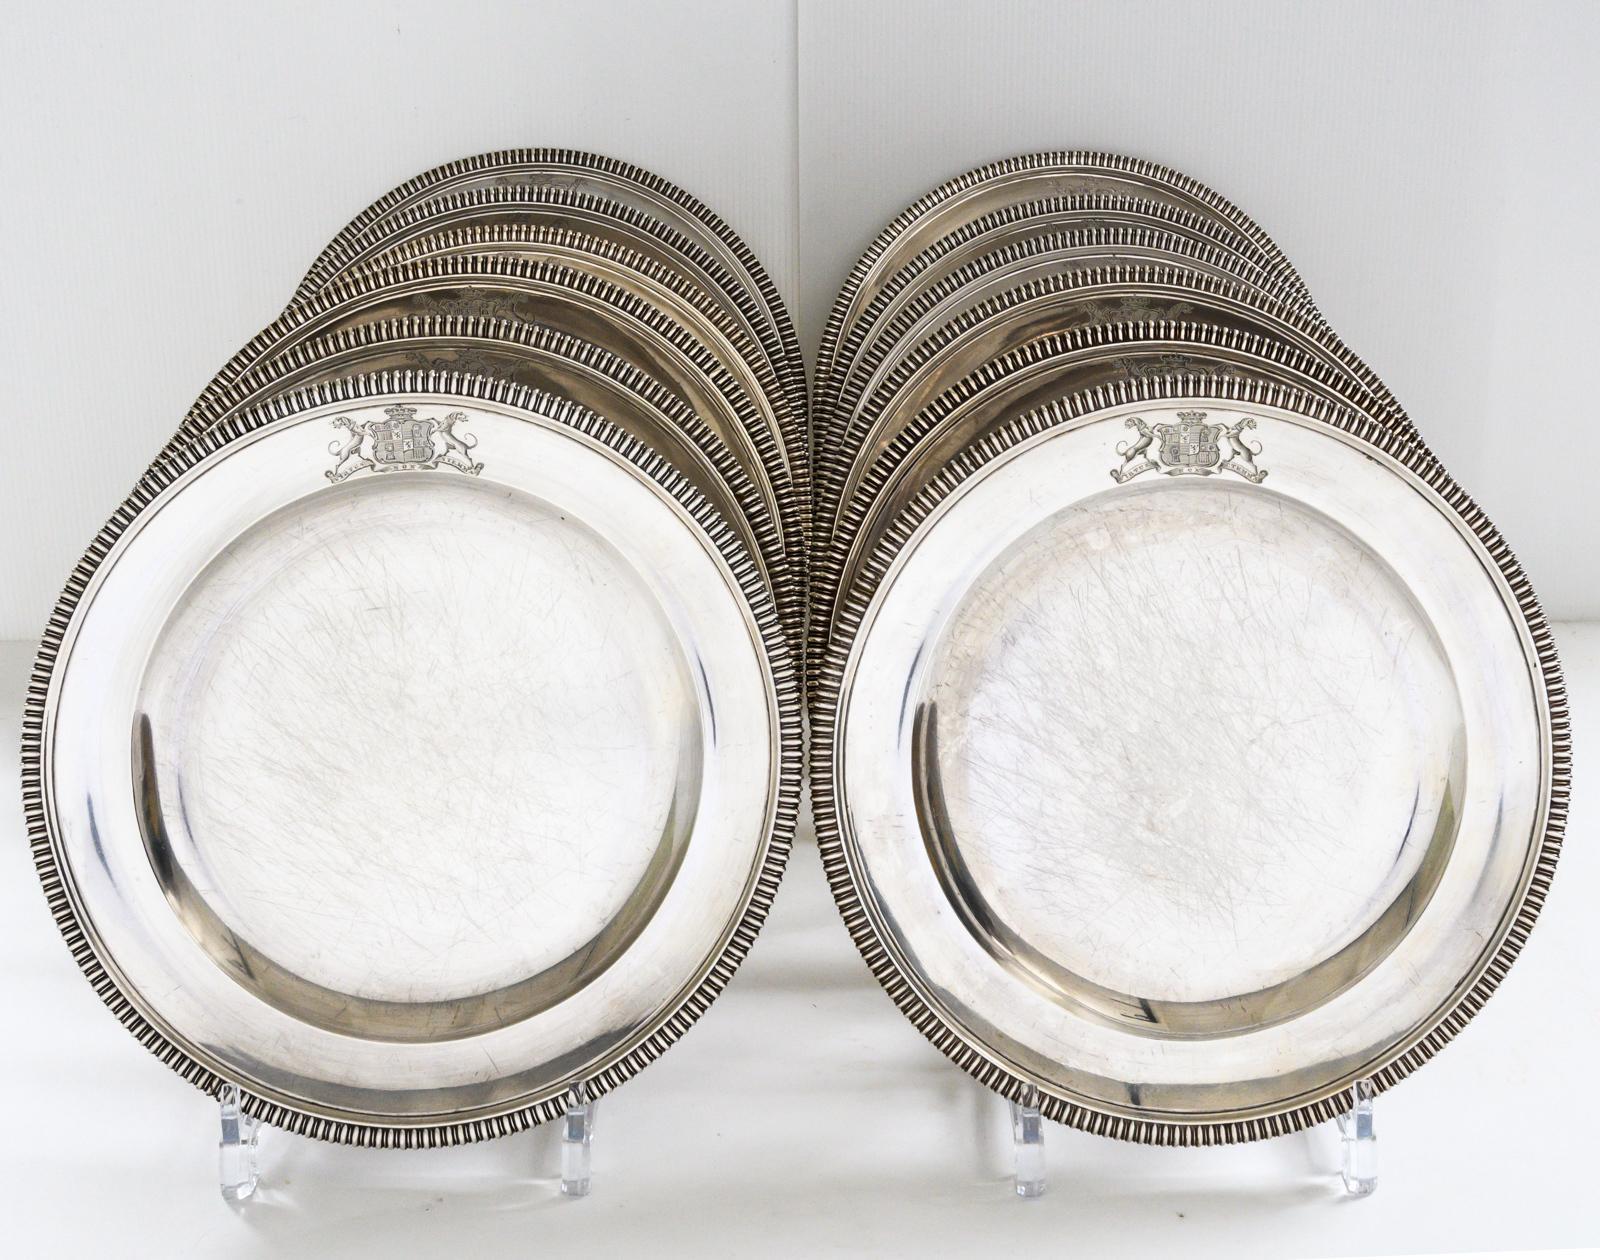 Set of twelve William IV sterling silver plates by Paul Storr. Each plate engraved with the crest of Robert GROSVENOR (1767-1845) 1st Marquess of Westminster, hallmarked with Paul Storr’s makers mark and date marks for London 1837 Provenance: Ex